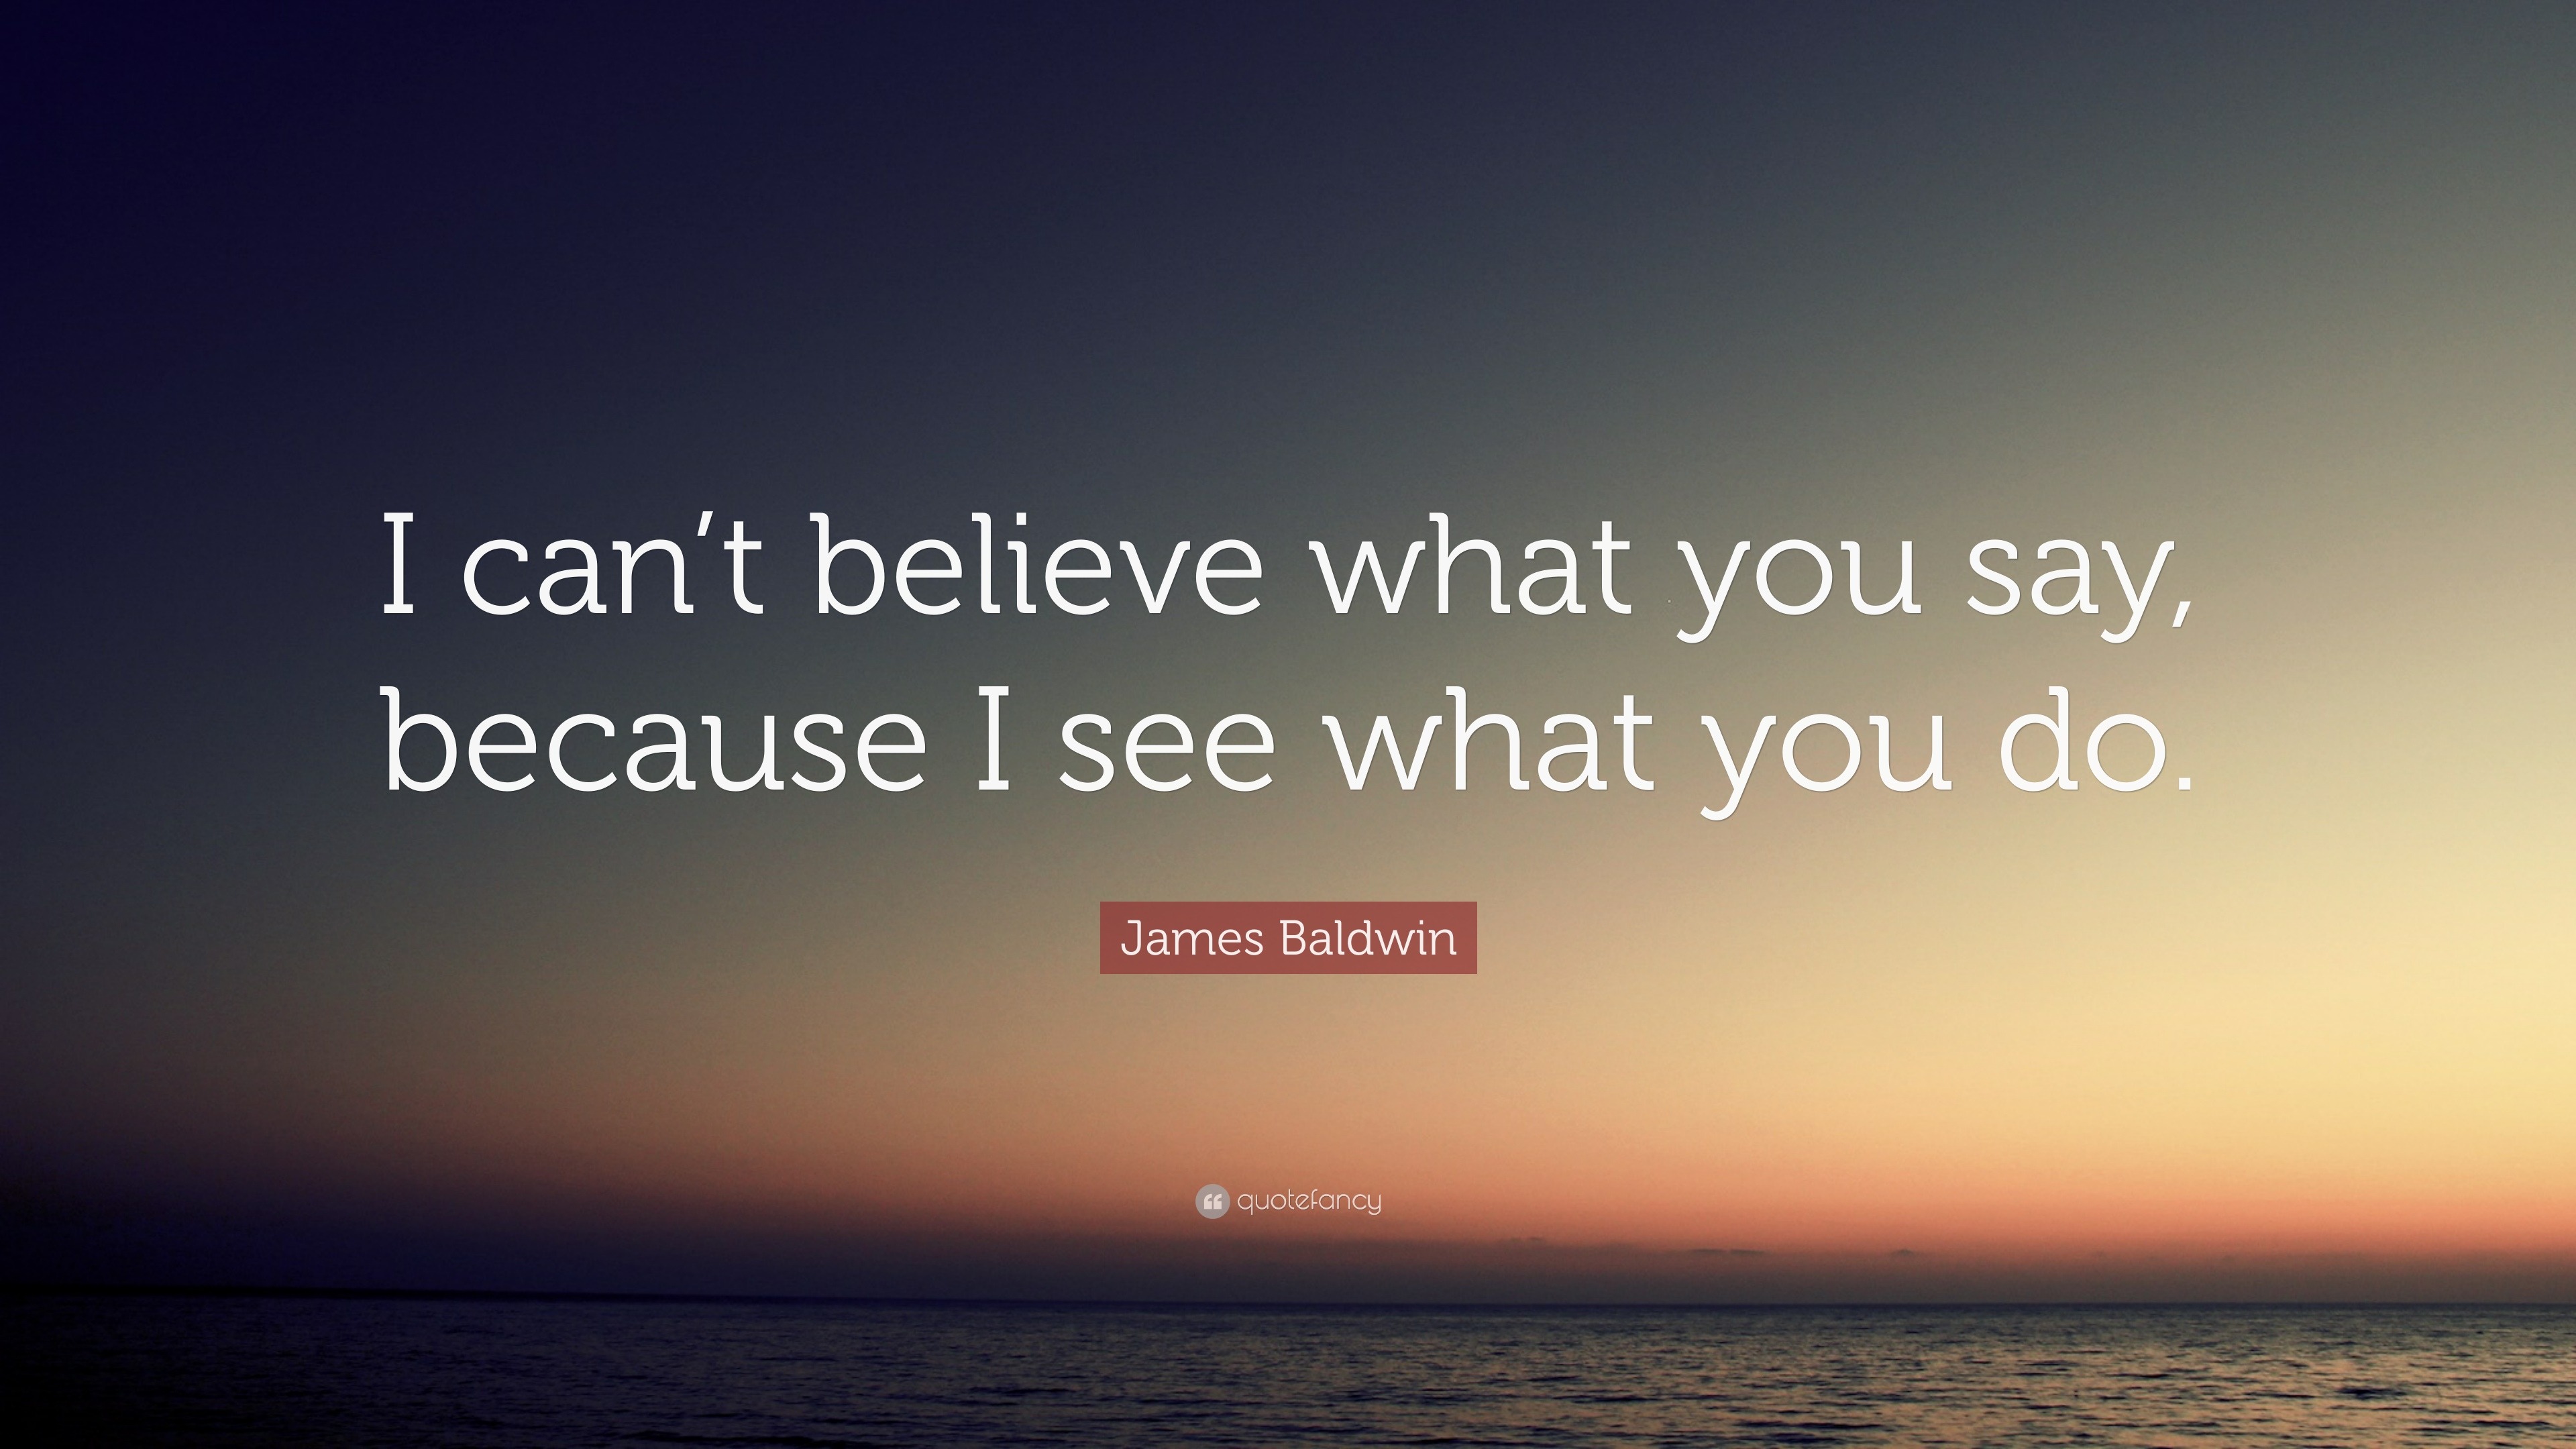 James Baldwin Quote: “I can't believe what you say, because I see what you  do.”